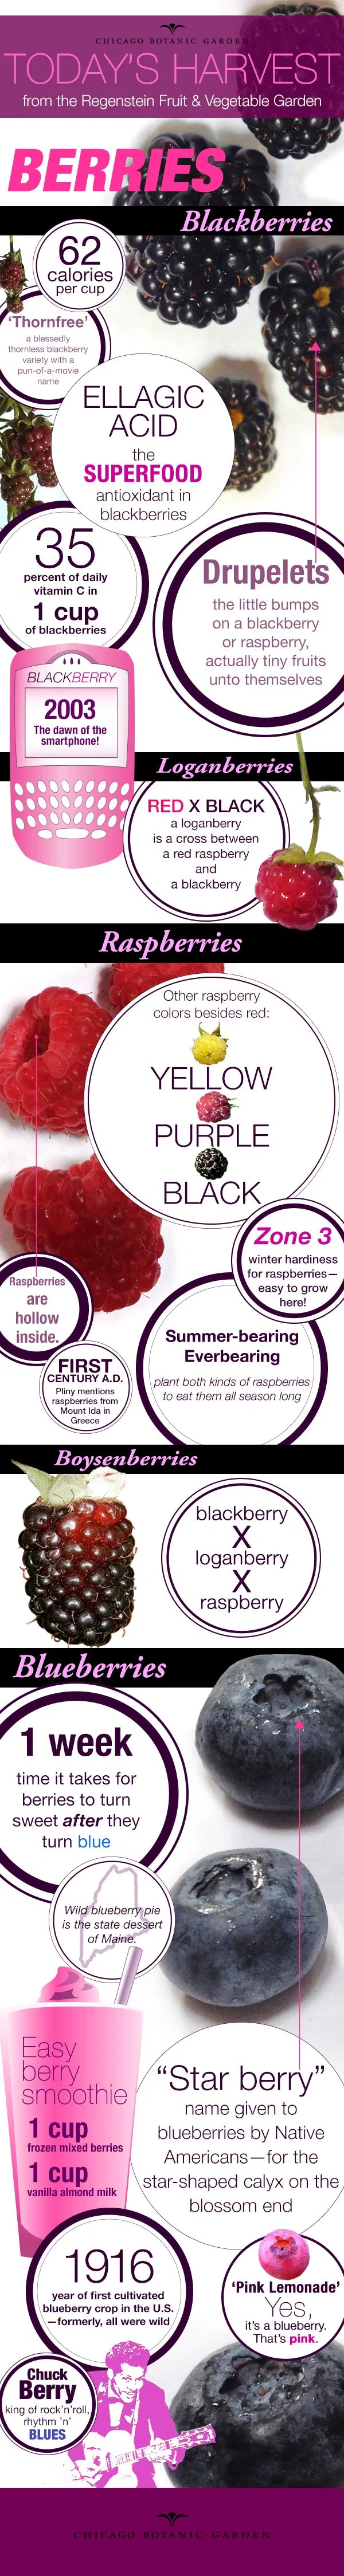 An Infographic on Berries